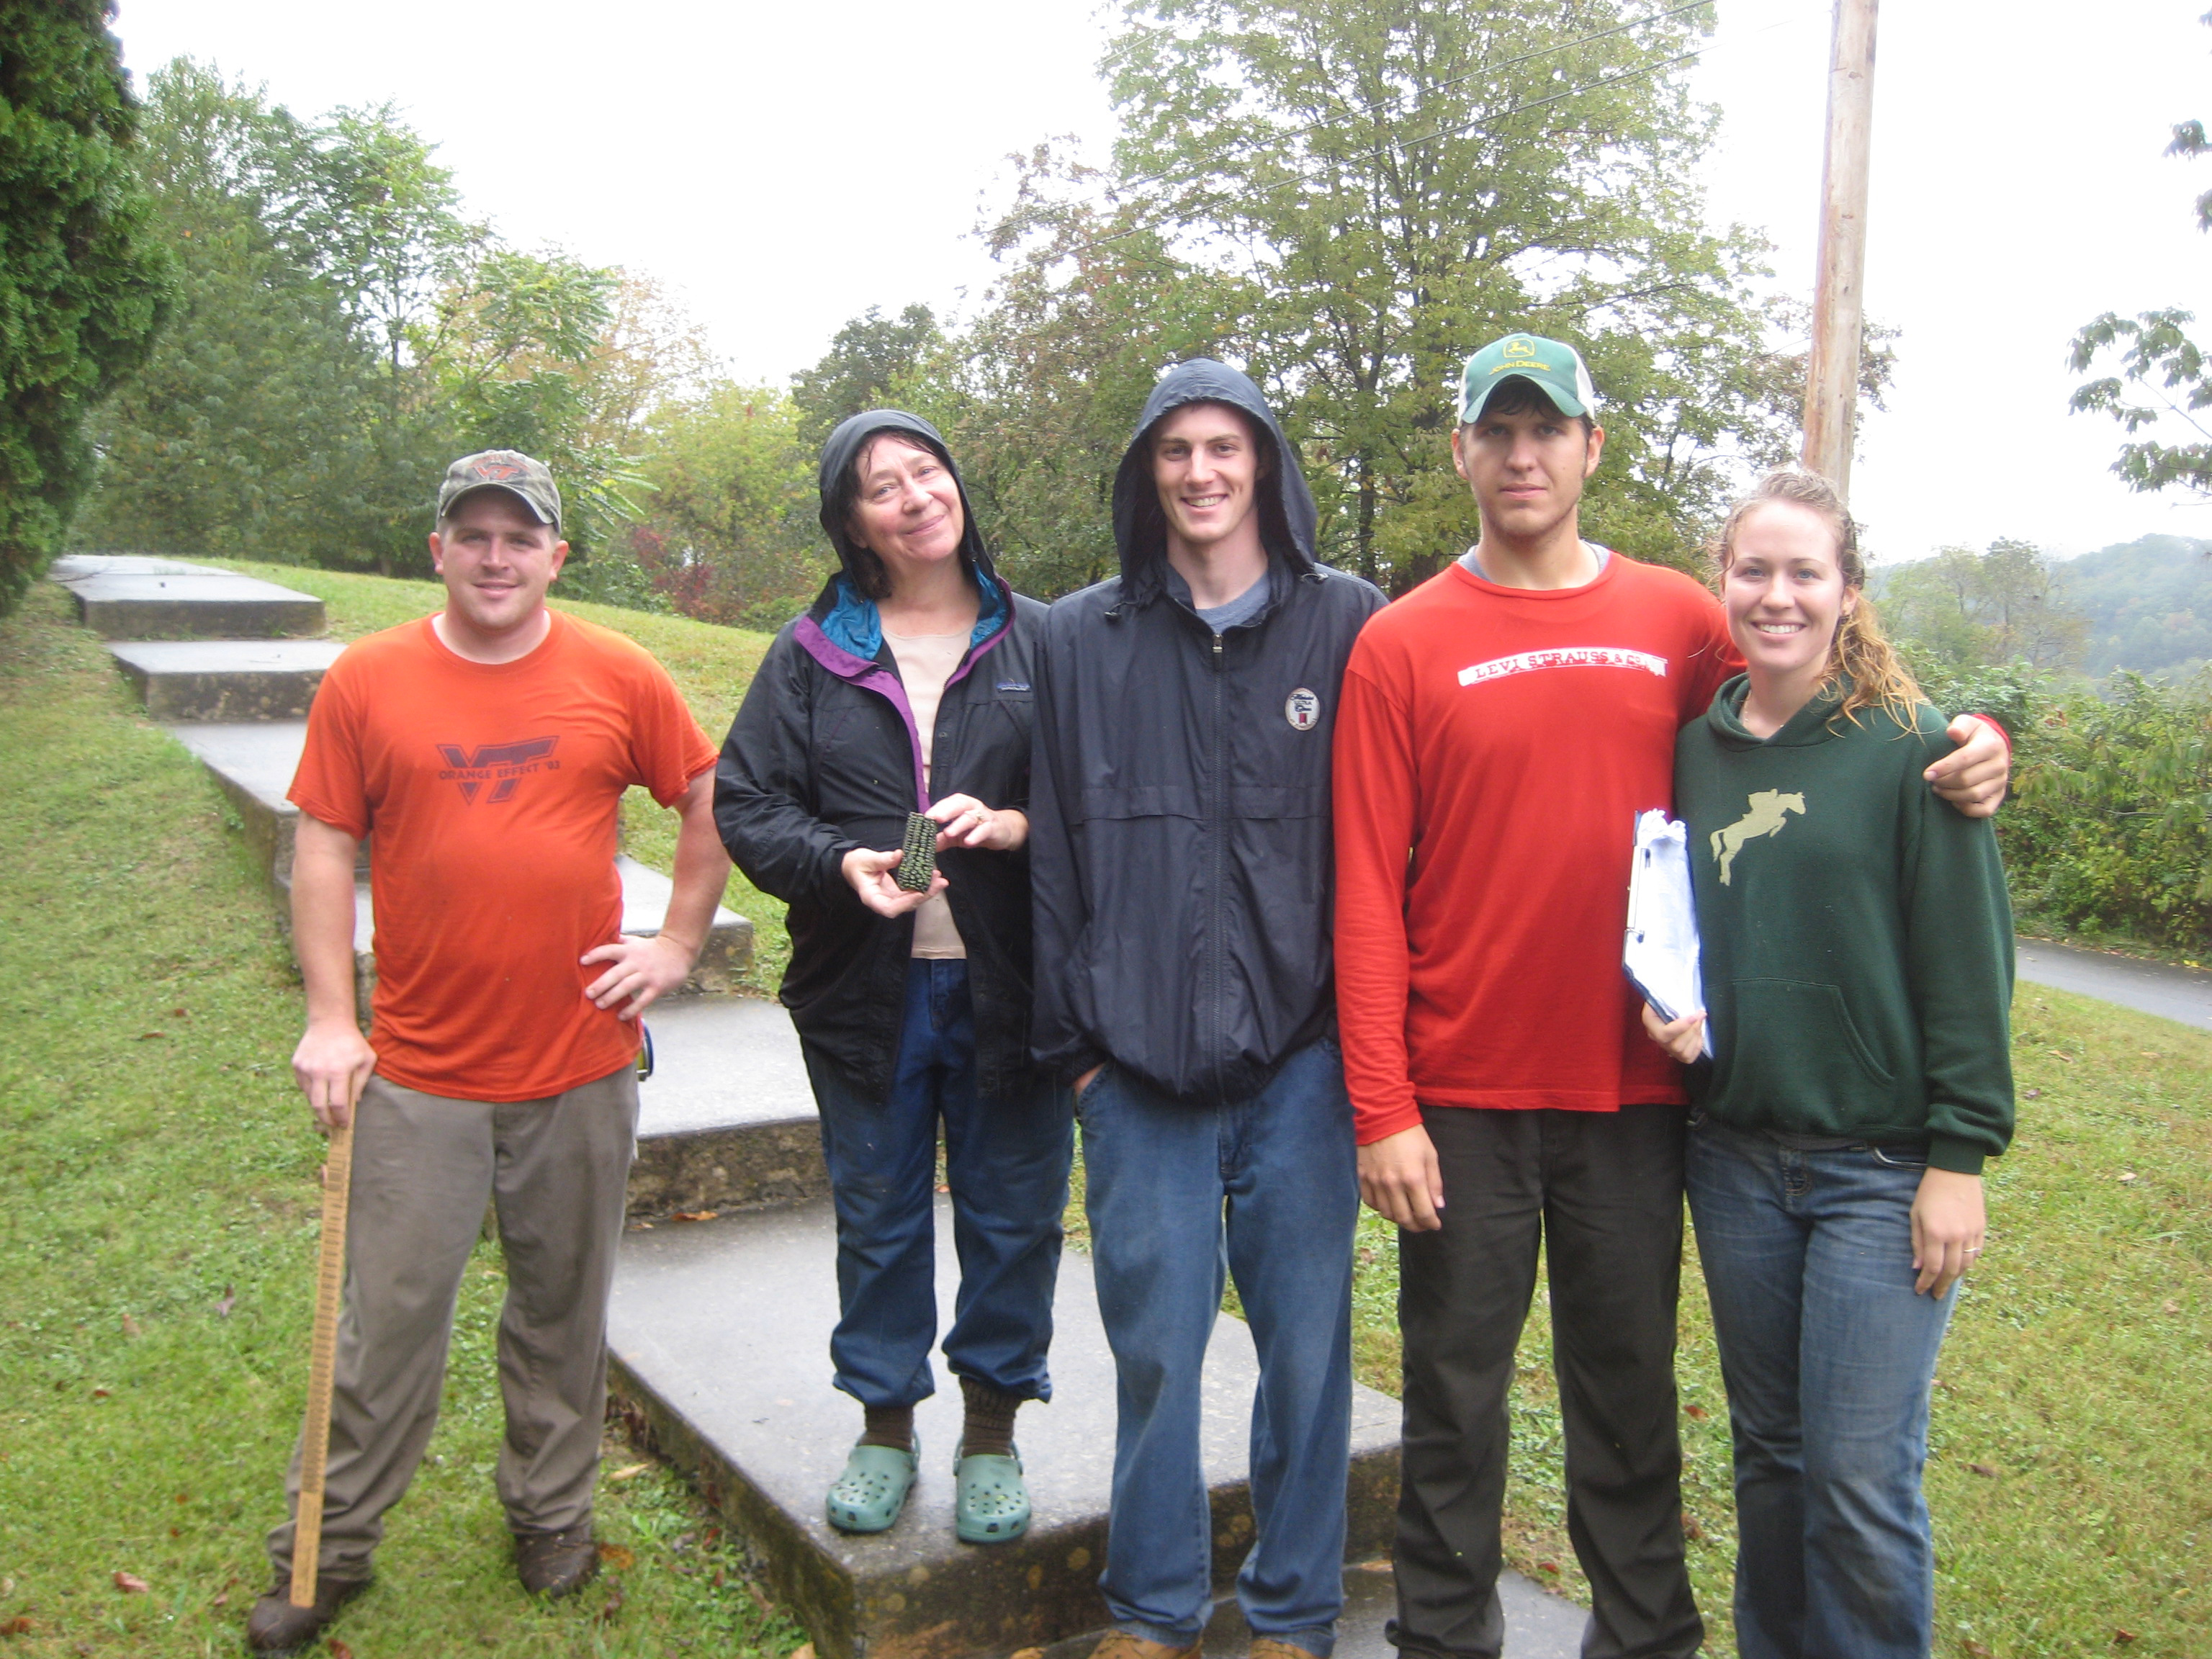 Landowner Betty Bailey (second from left) welcomed Virginia Tech service-learning students (left to right) J.B. Snelson, Chris Mernin, Spencer Blankenship, and Bonnie Lawrie on a rainy day in late September to identify possibilities for planting trees to reduce erosion along stream banks on her property.